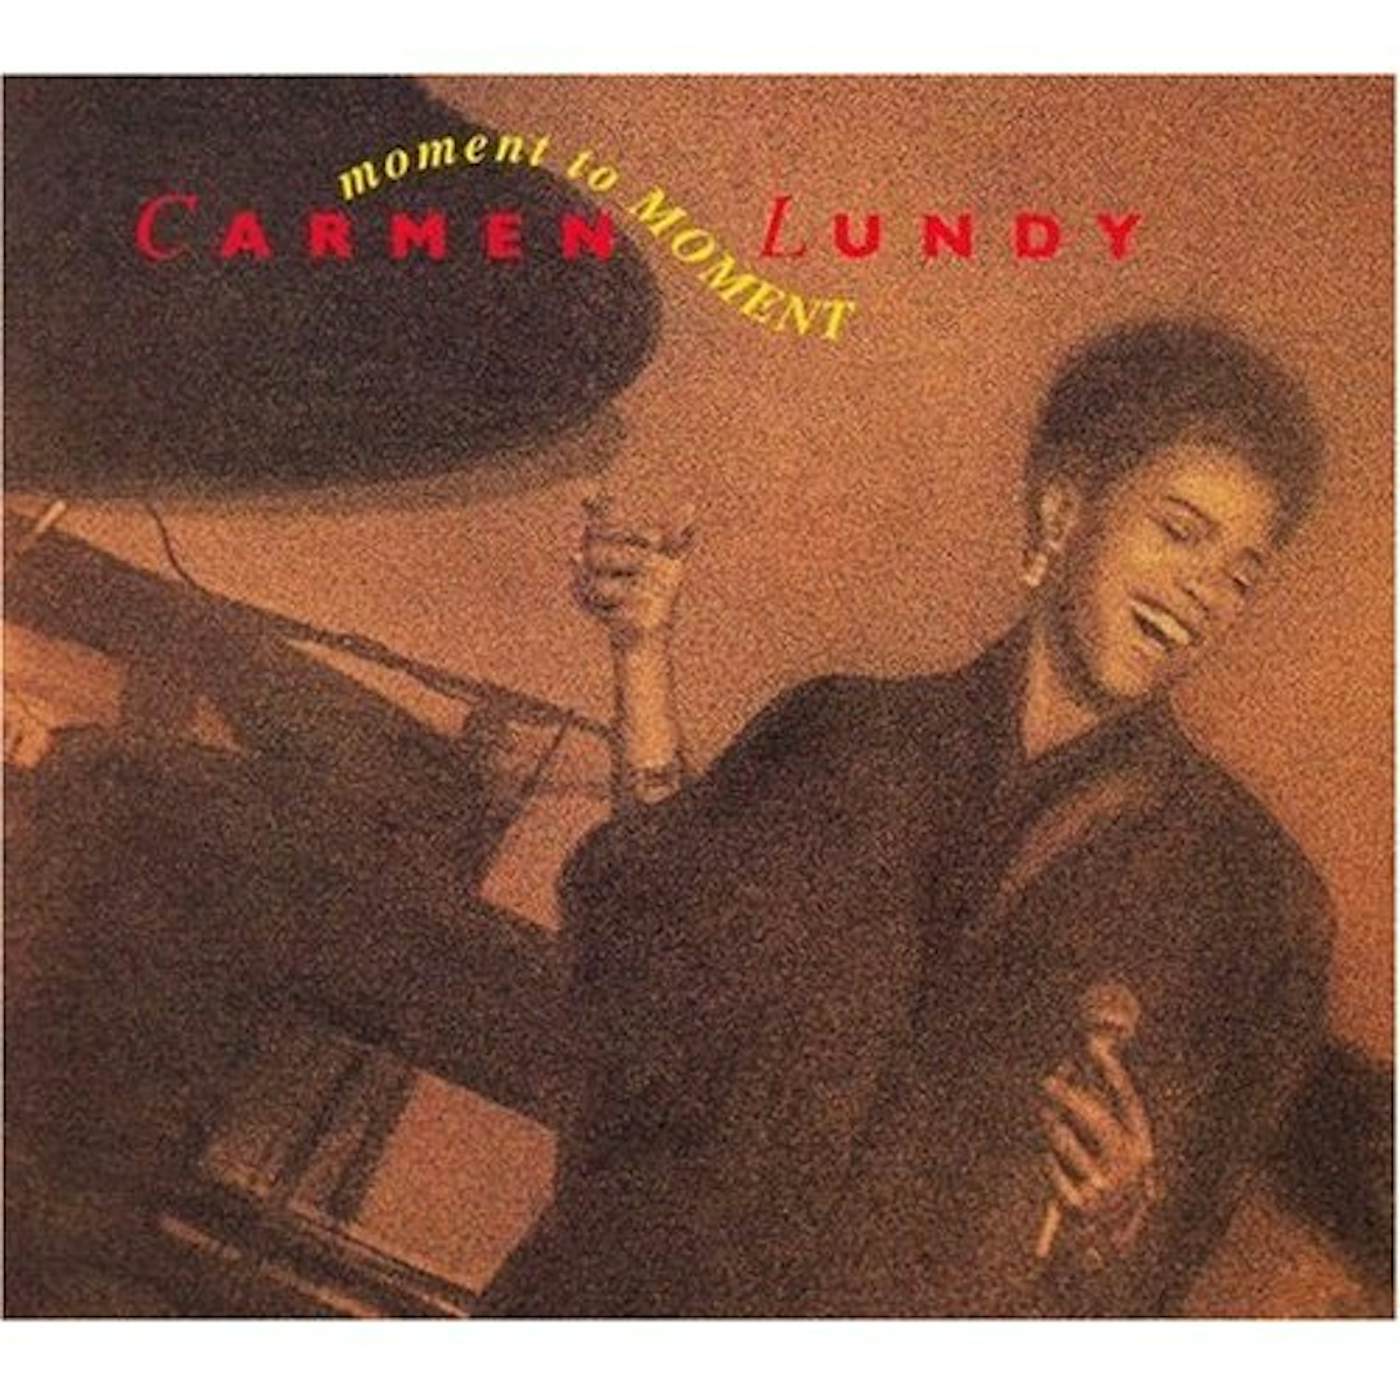 Carmen Lundy MOMENT TO MOMENT CD